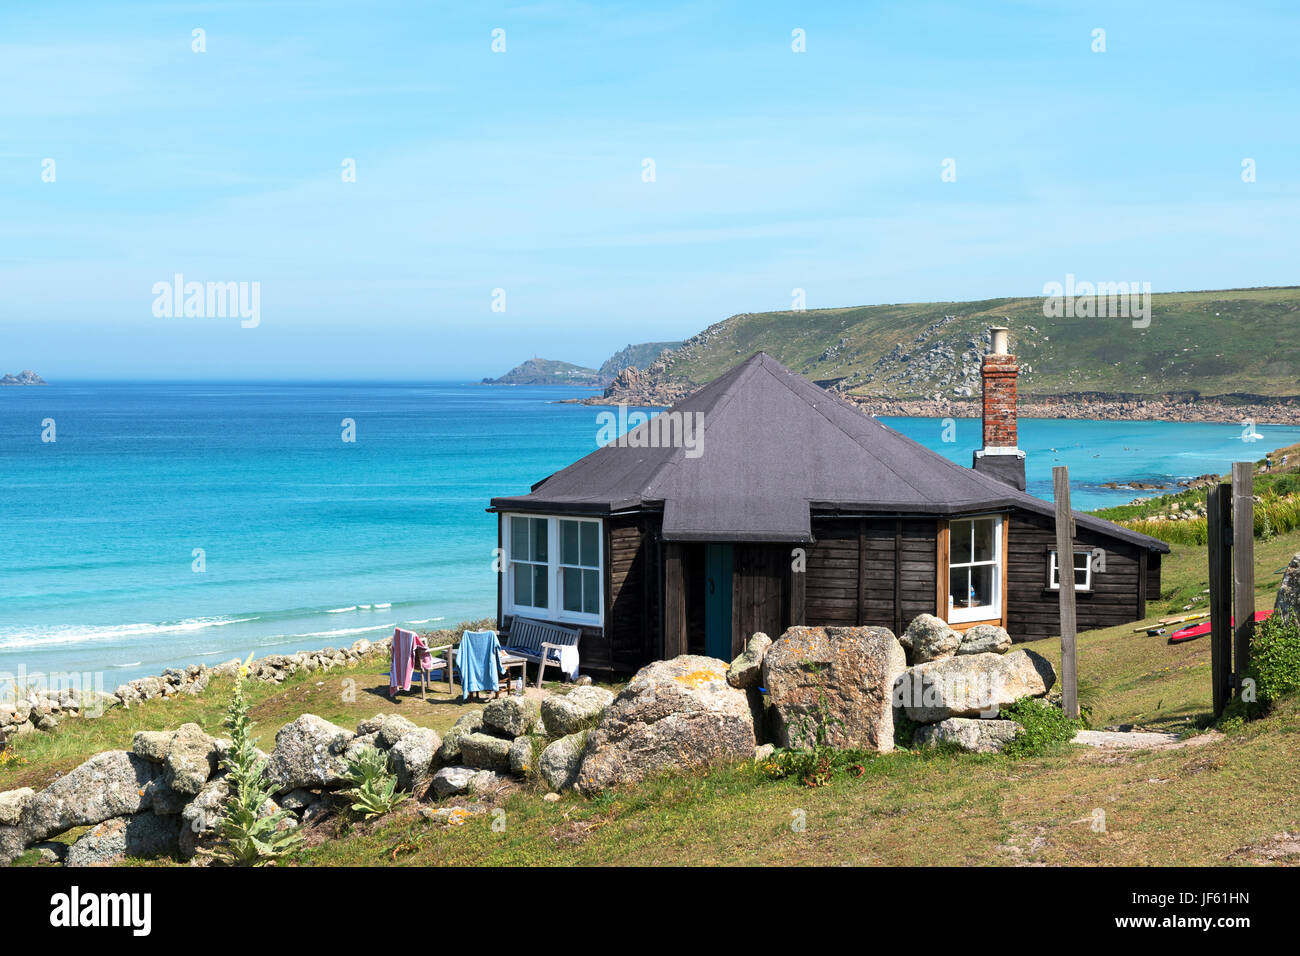 a holiday cottage overlooking the beach at sennen cove in cornwall, england, britain, uk. Stock Photo